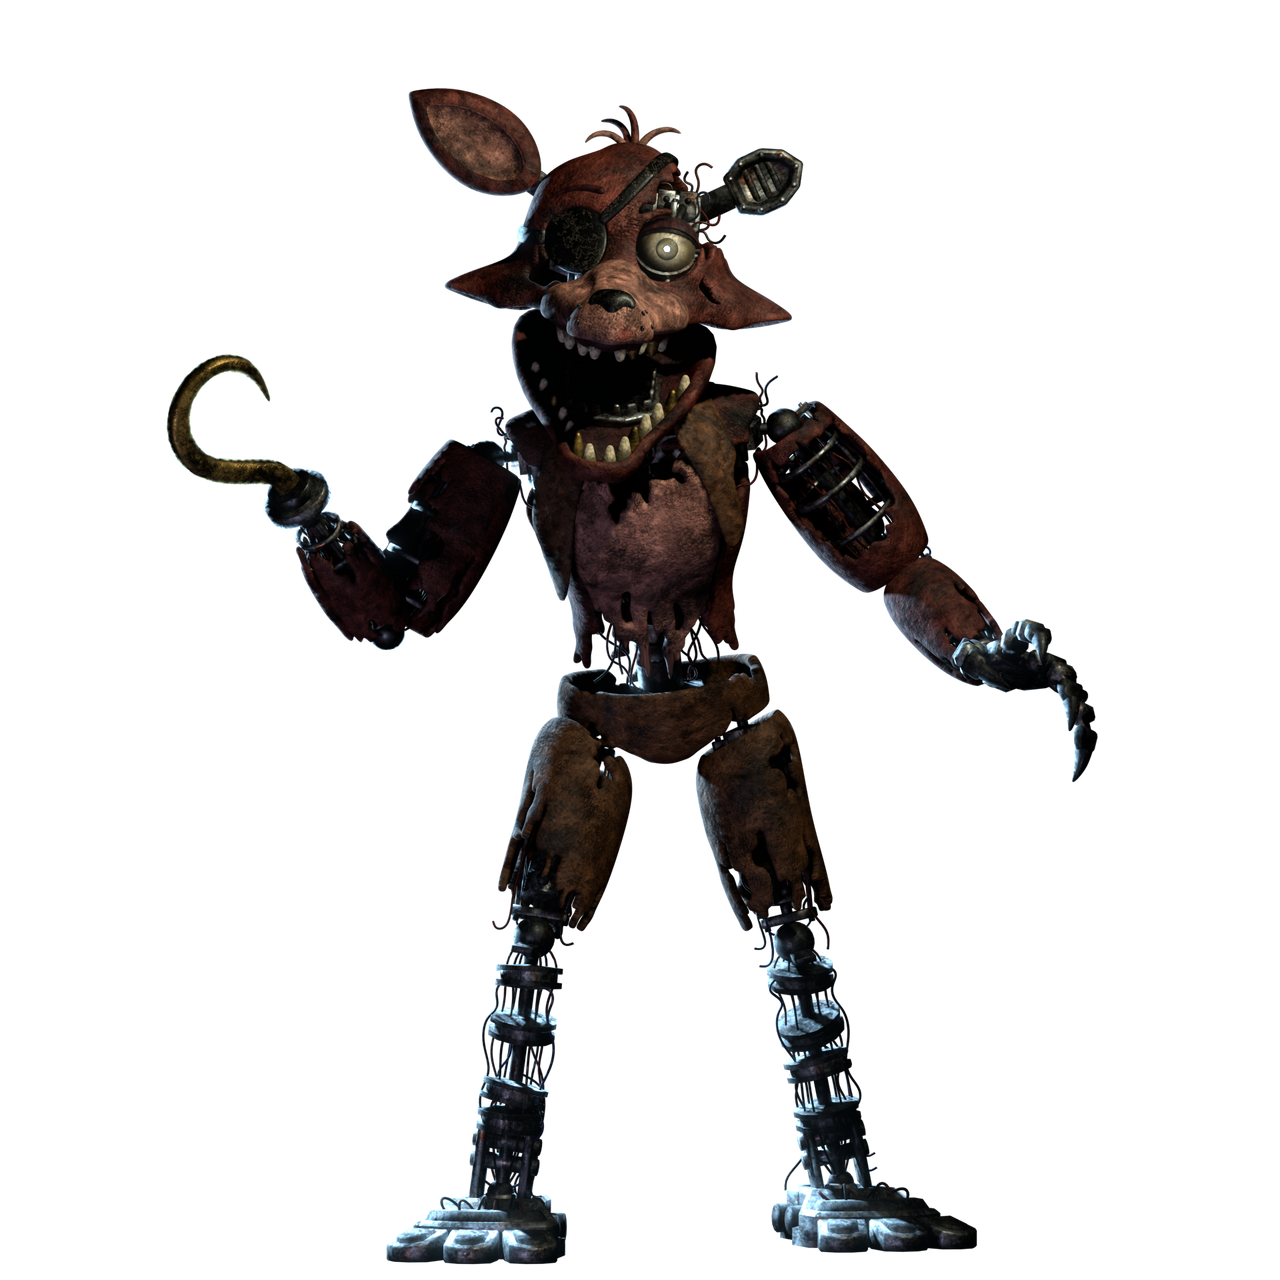 Withered Foxy. by  on @DeviantArt